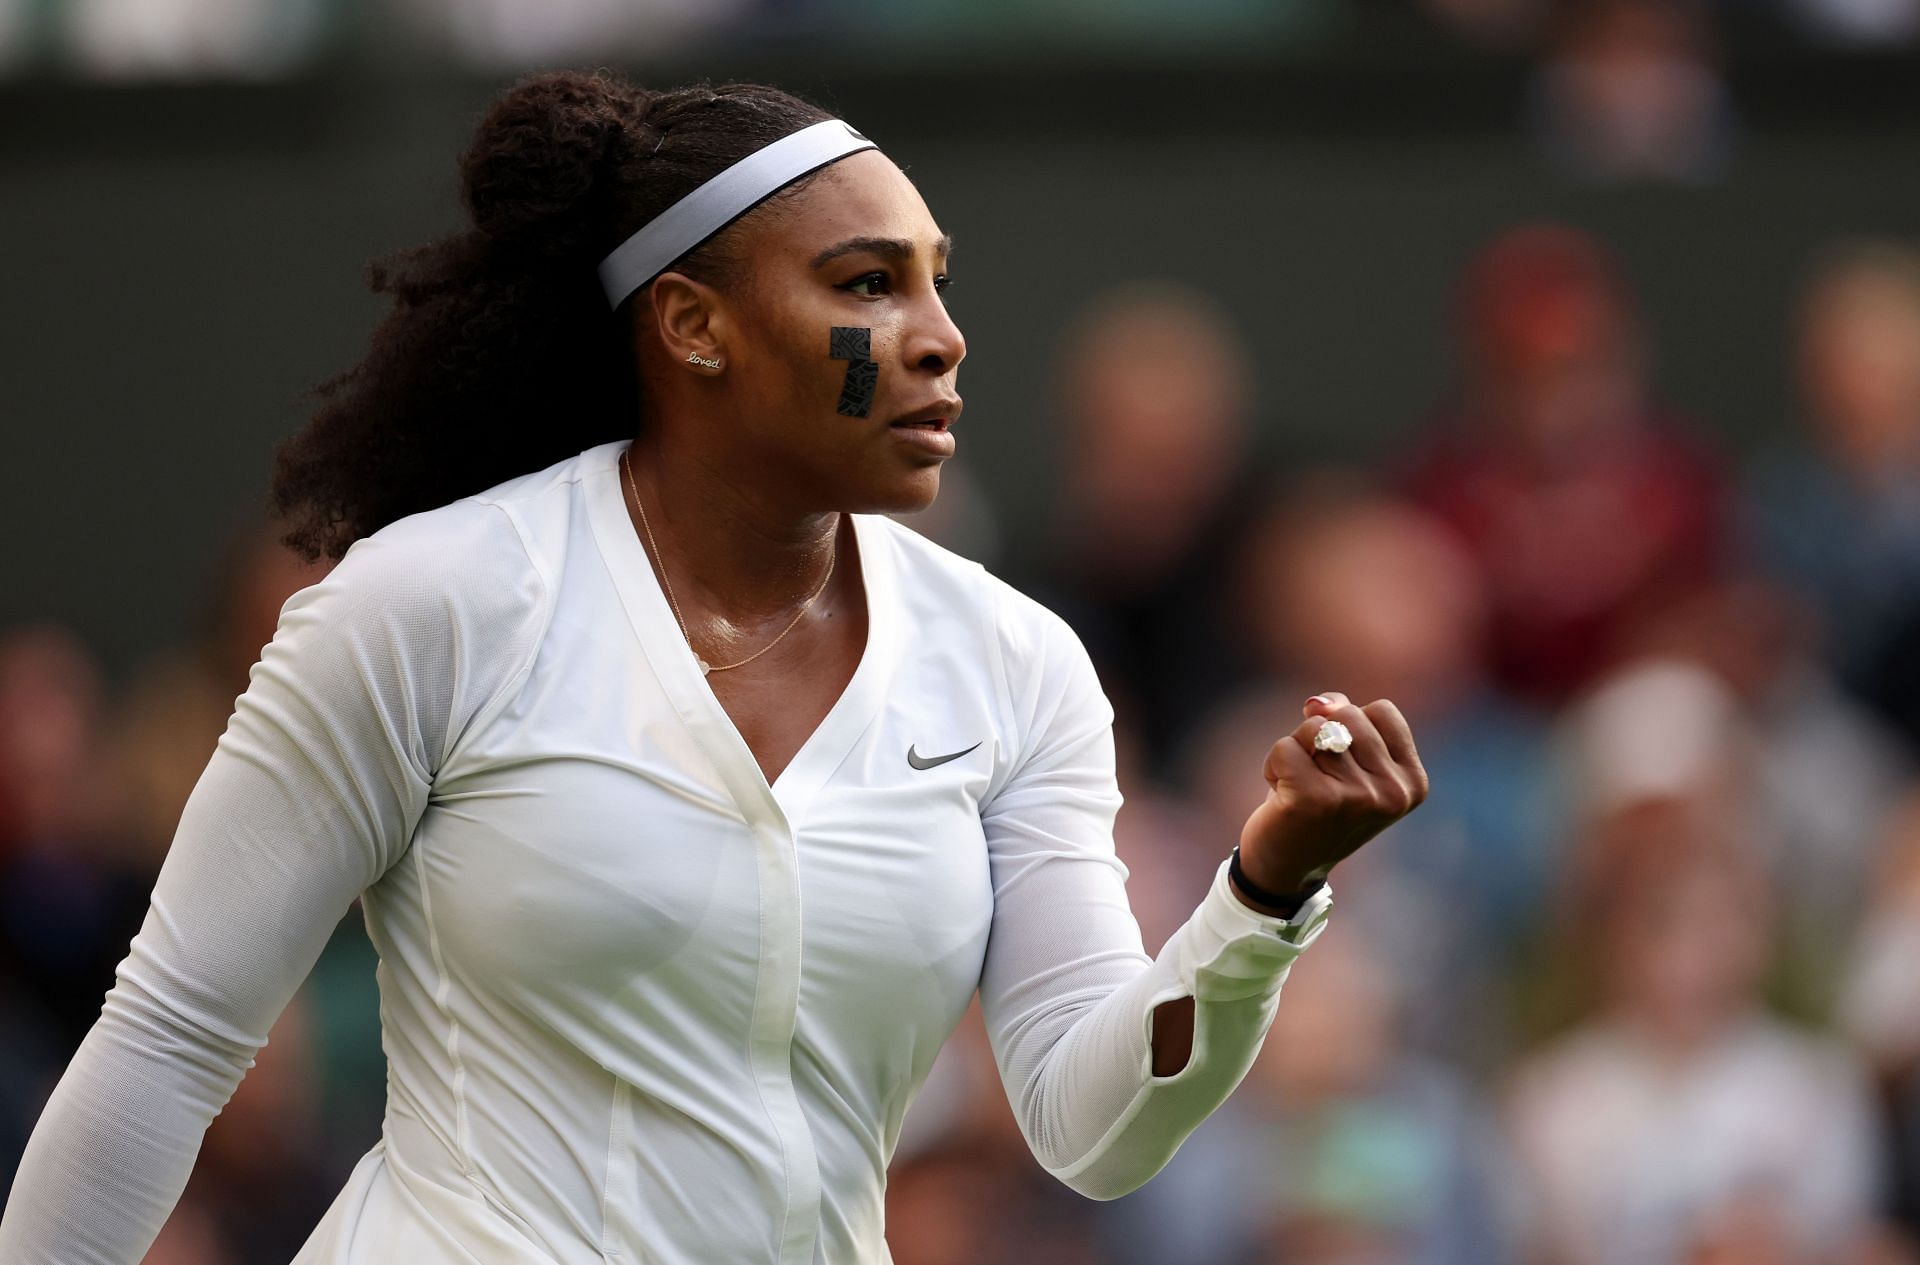 Day Two: The Championships - Wimbledon 2022- Serena Williams